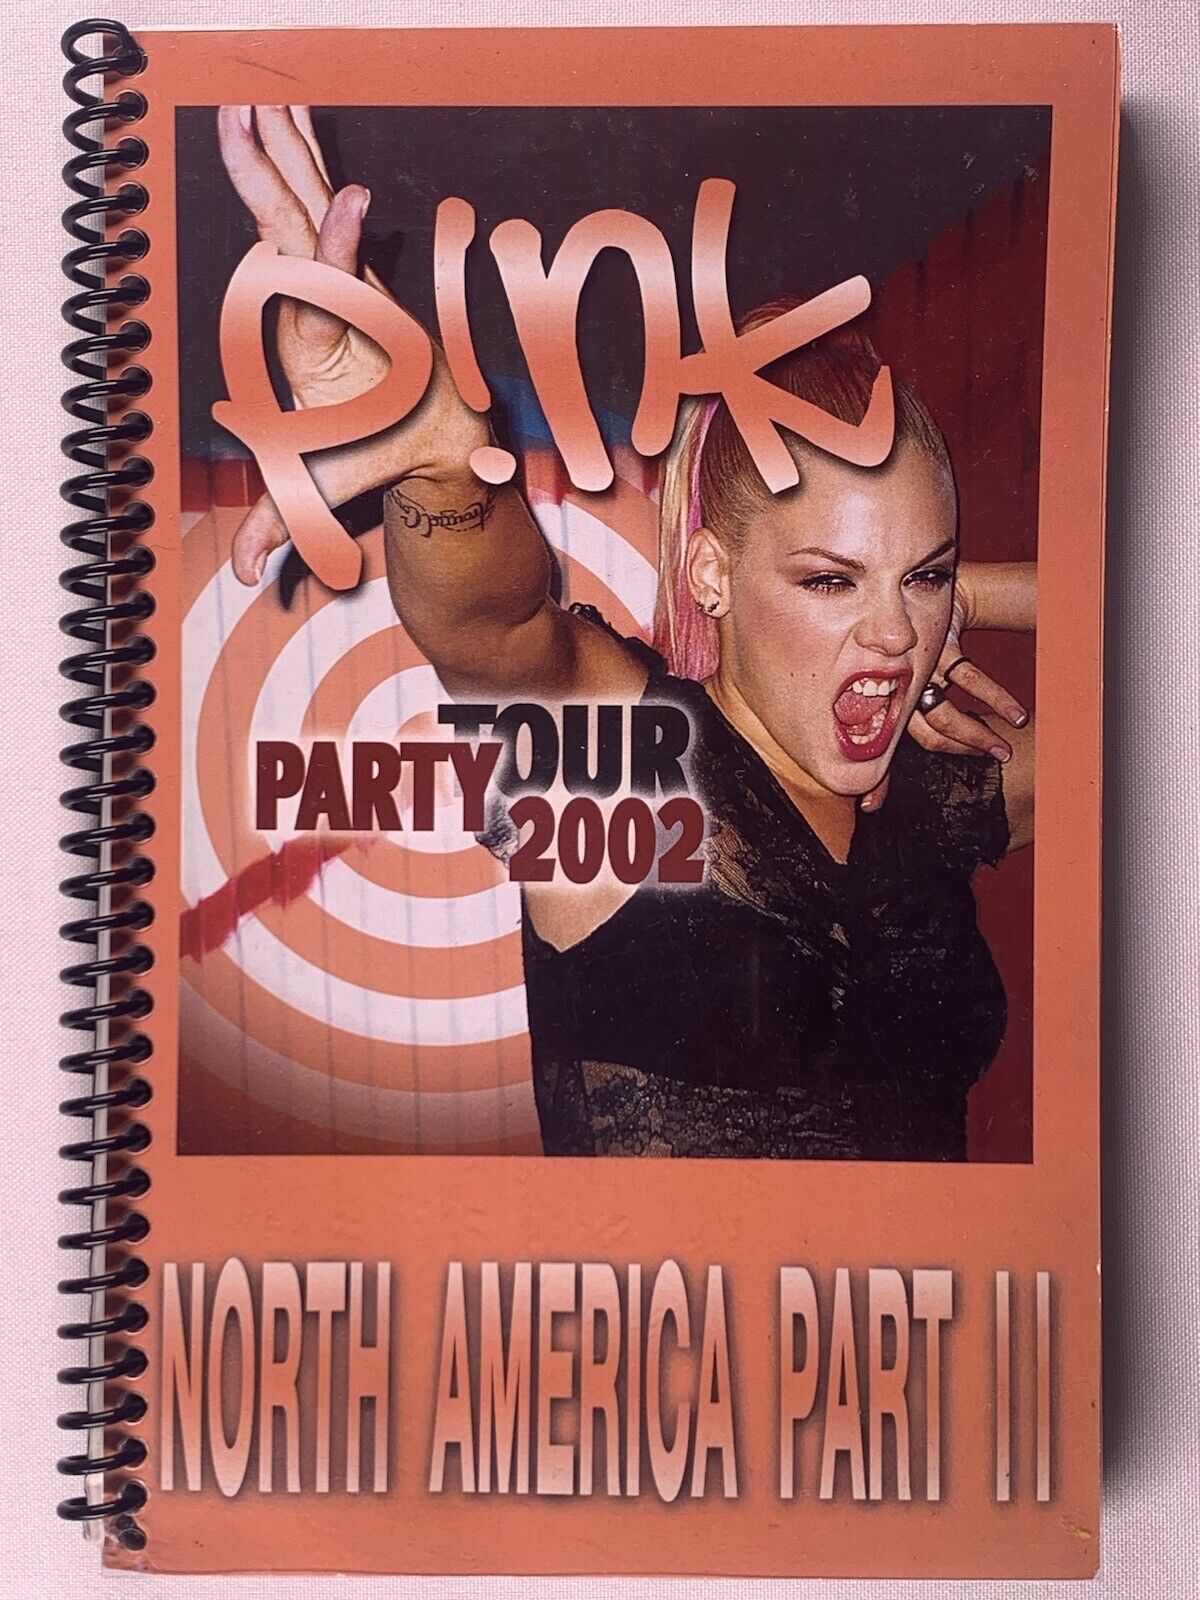 Pink Itinerary Original Vintage North American Party Tour Part II 2002